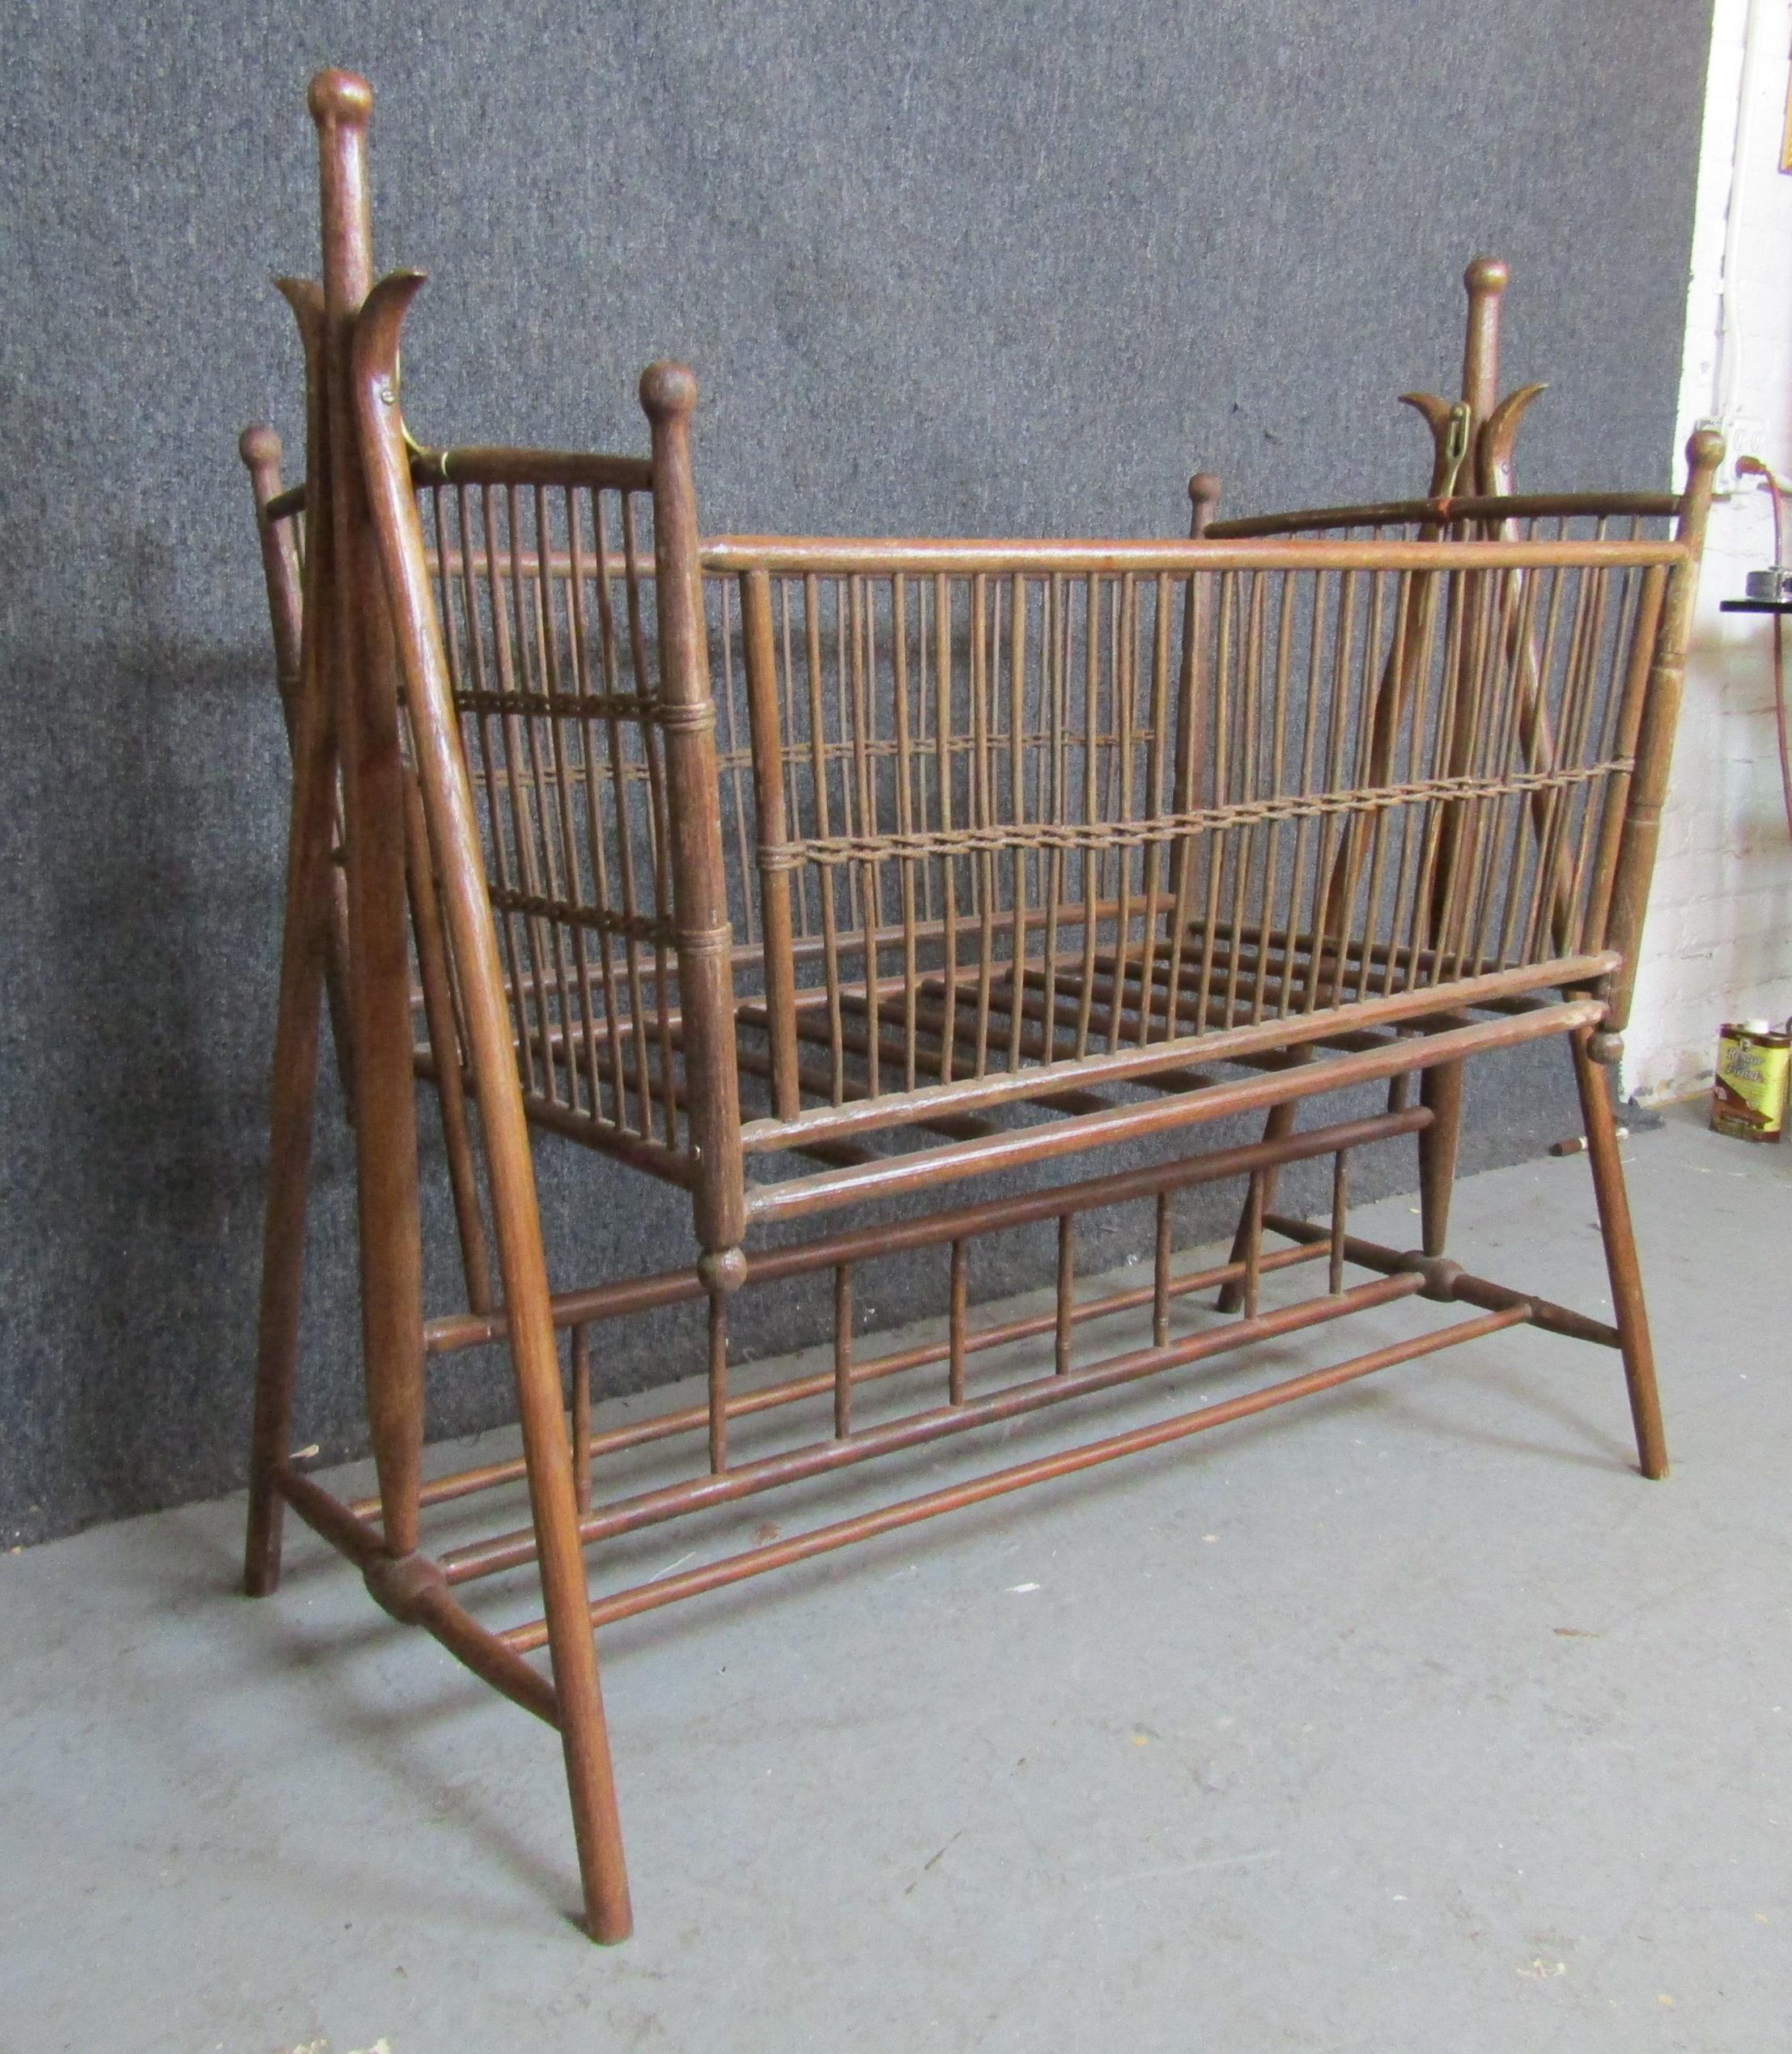 Victorian style antique crib made of wicker with detachable swing. Great as antique decoration!
Please confirm location NY or NJ